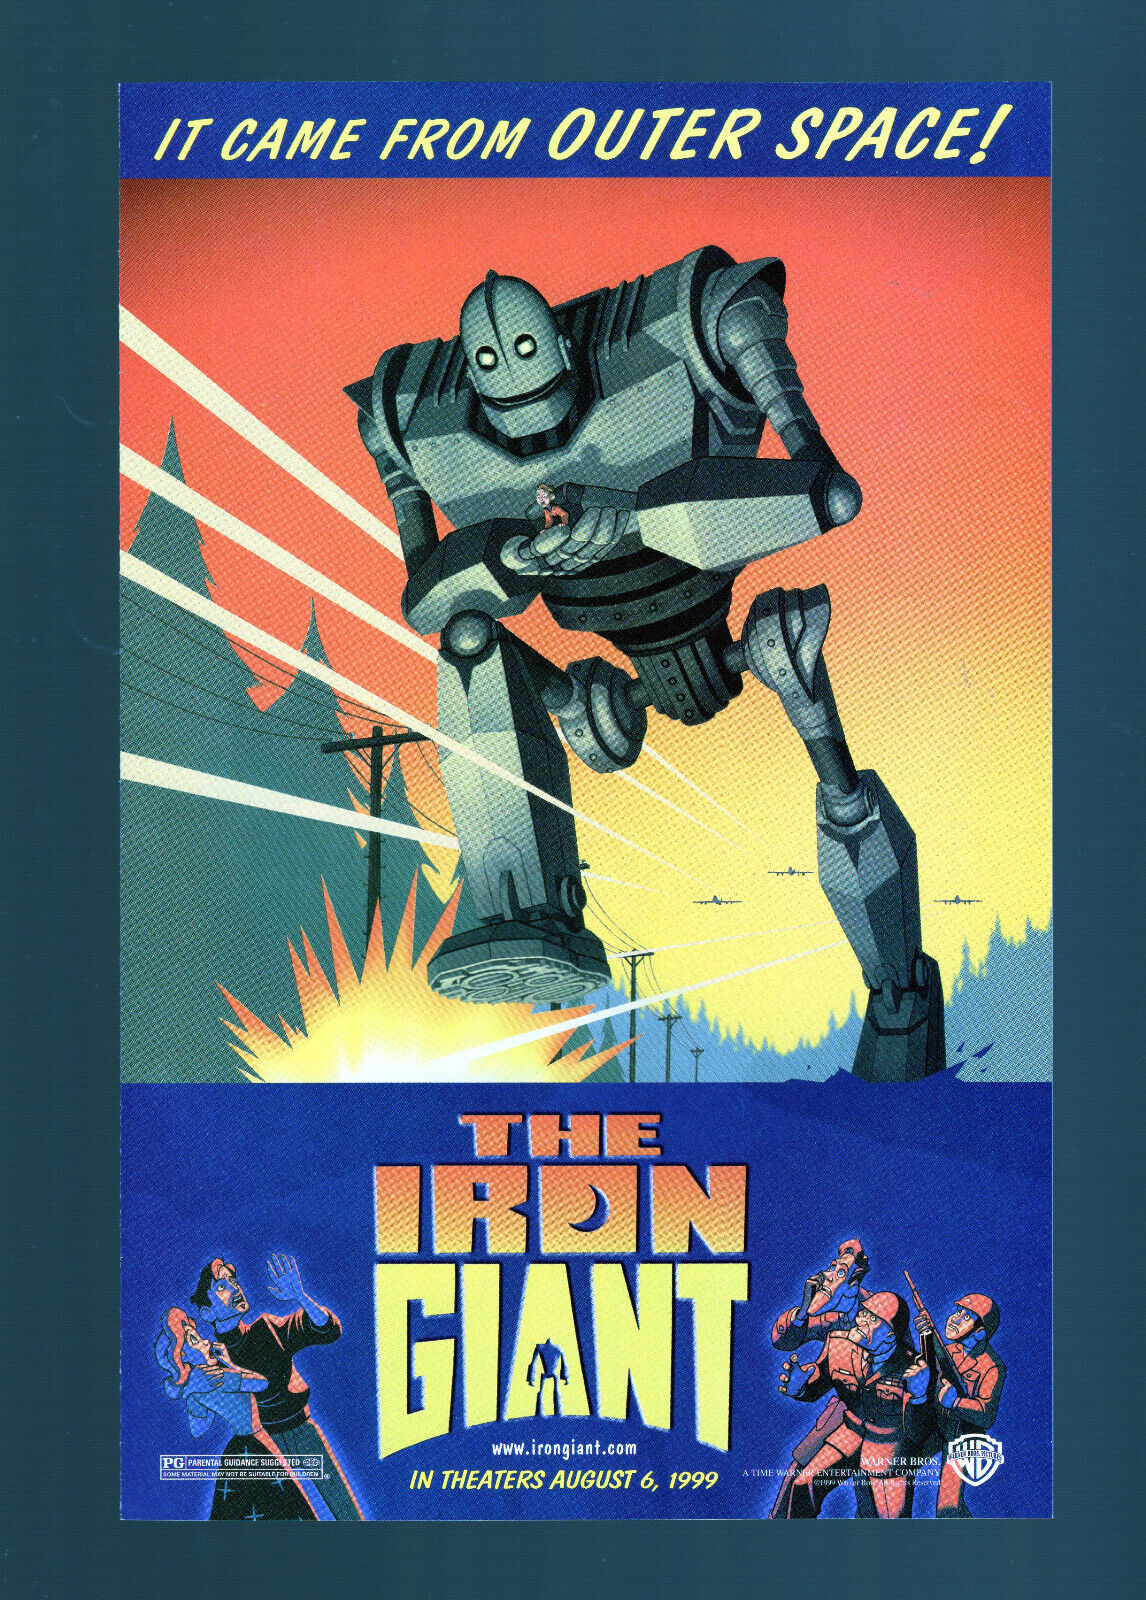 The Iron Giant - SDCC Promotional Movie Preview Comic Book. Warner Bros - 1999